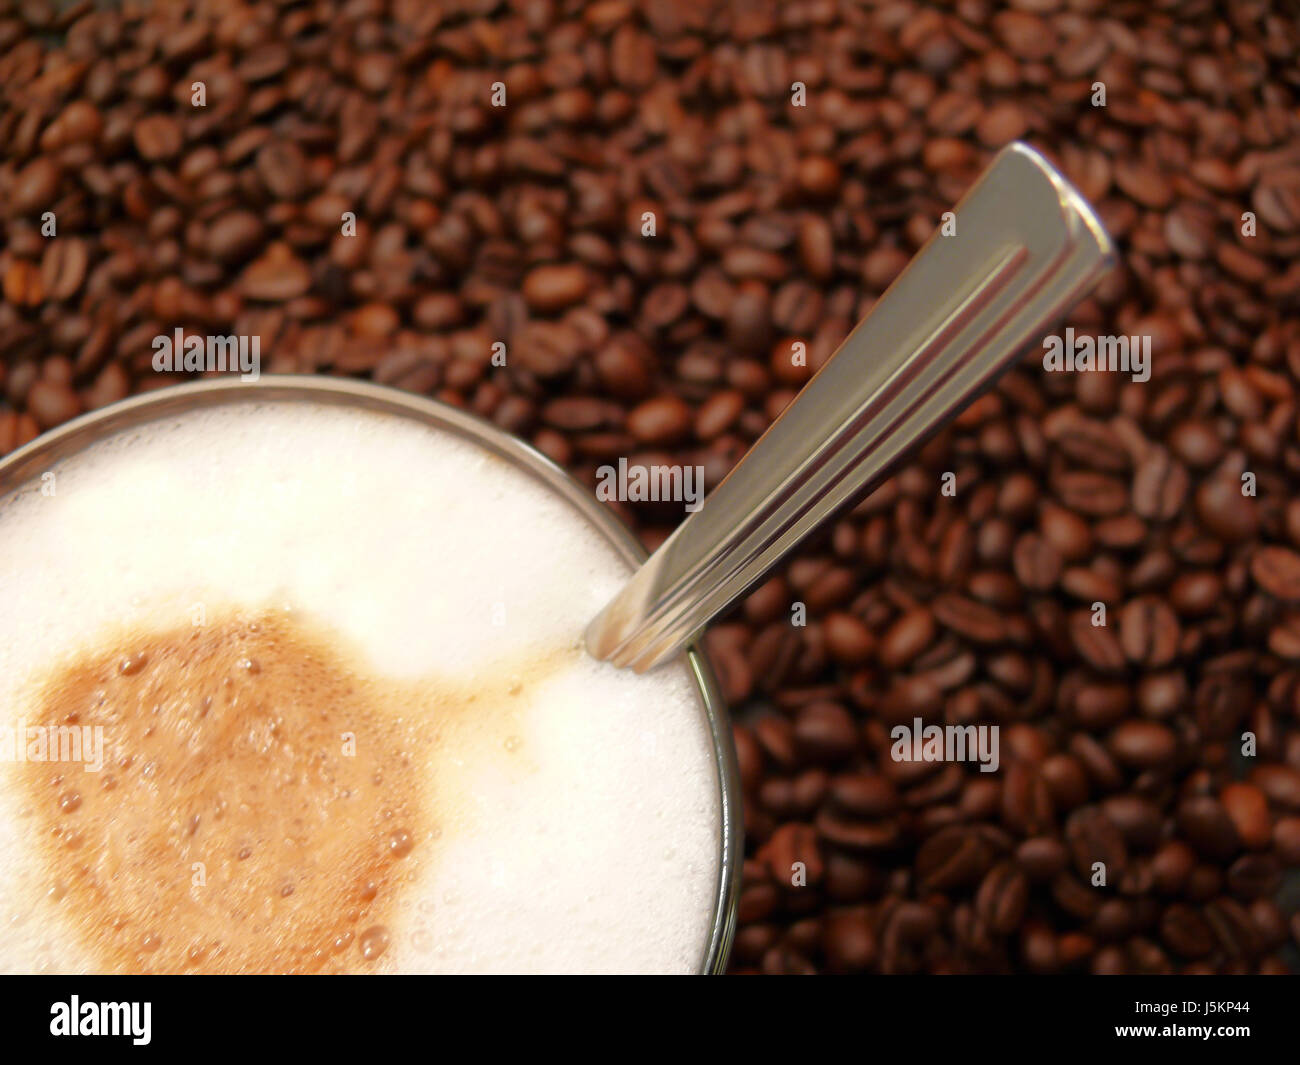 cafe cup coffee coffee bean drink brown brownish brunette gastronomy hot beans Stock Photo